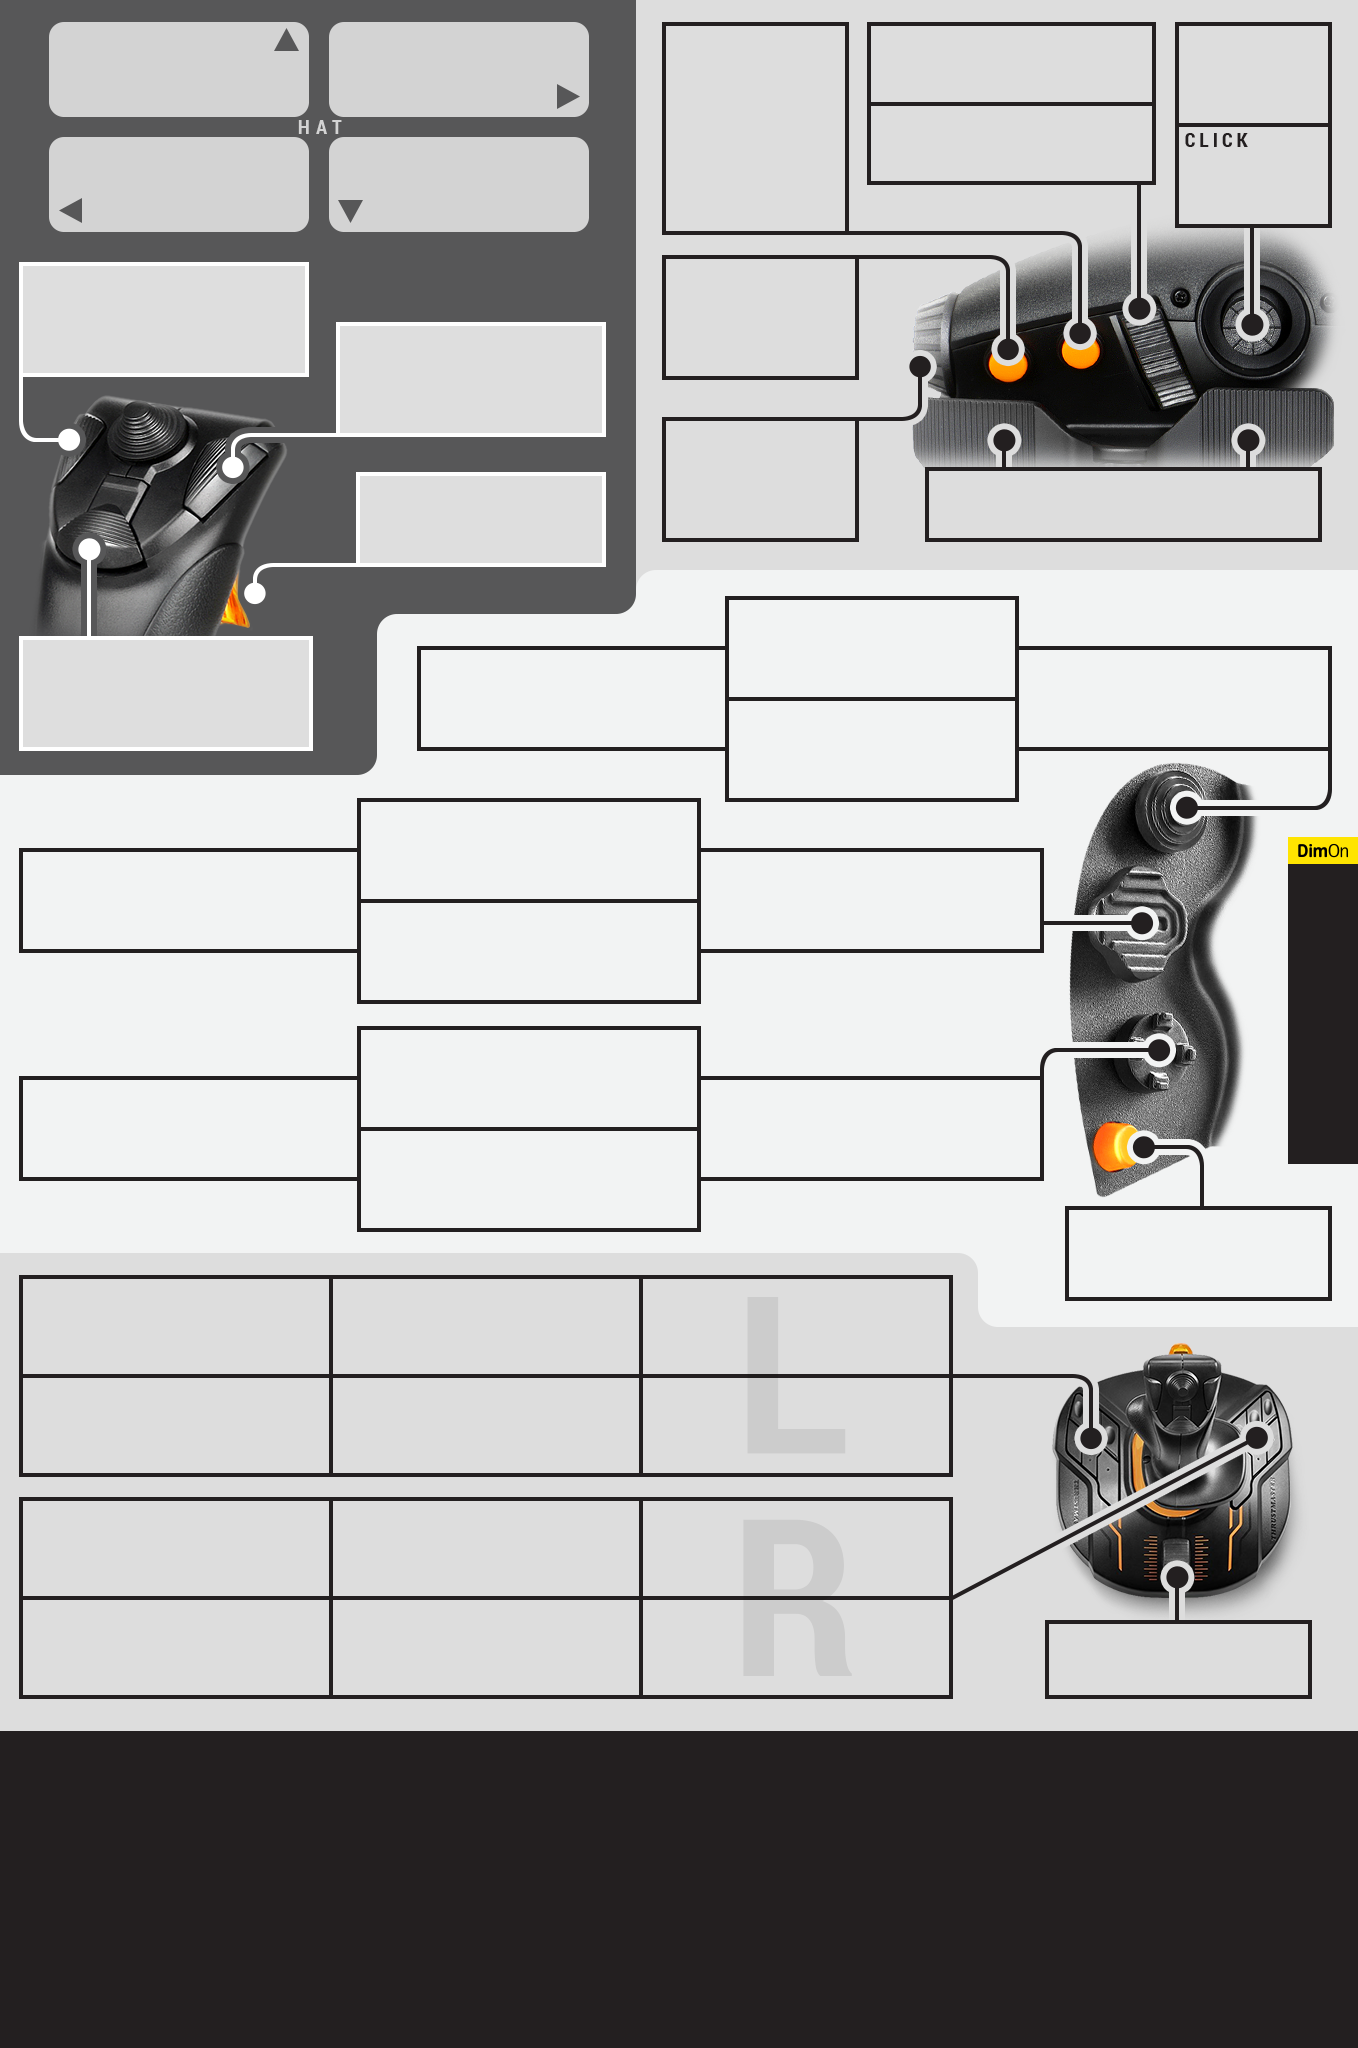 Thrustmaster T.16000M FCS Blank Profile Template - Updated 18 May 2021